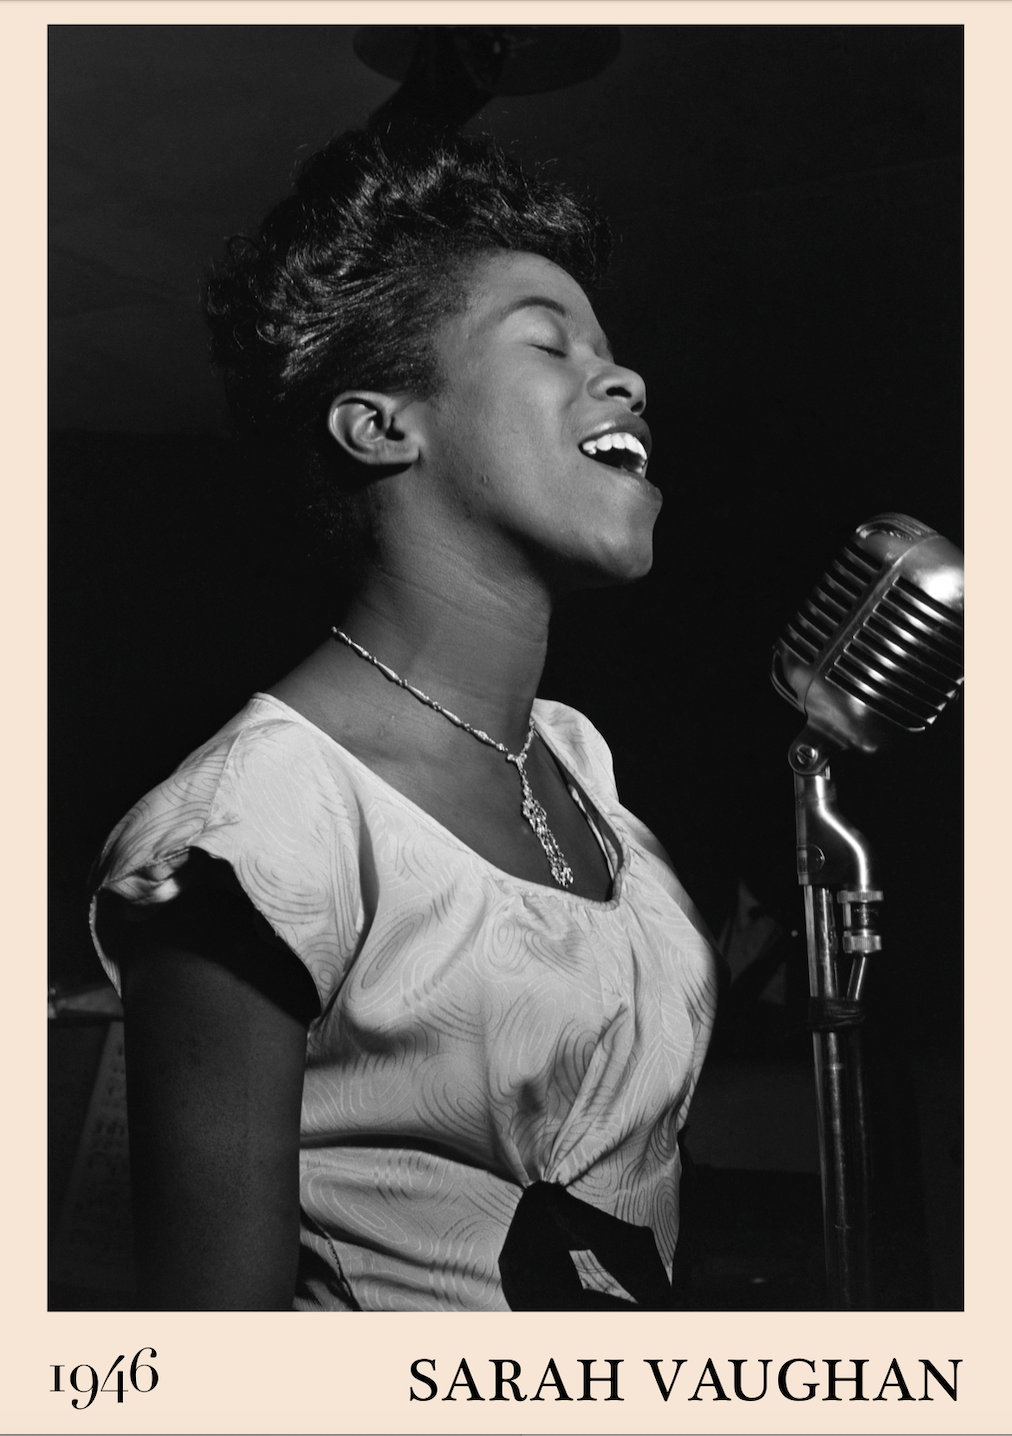 1946 photograph of Sarah Vaughan crafted into a retro black jazz poster with an off-white border